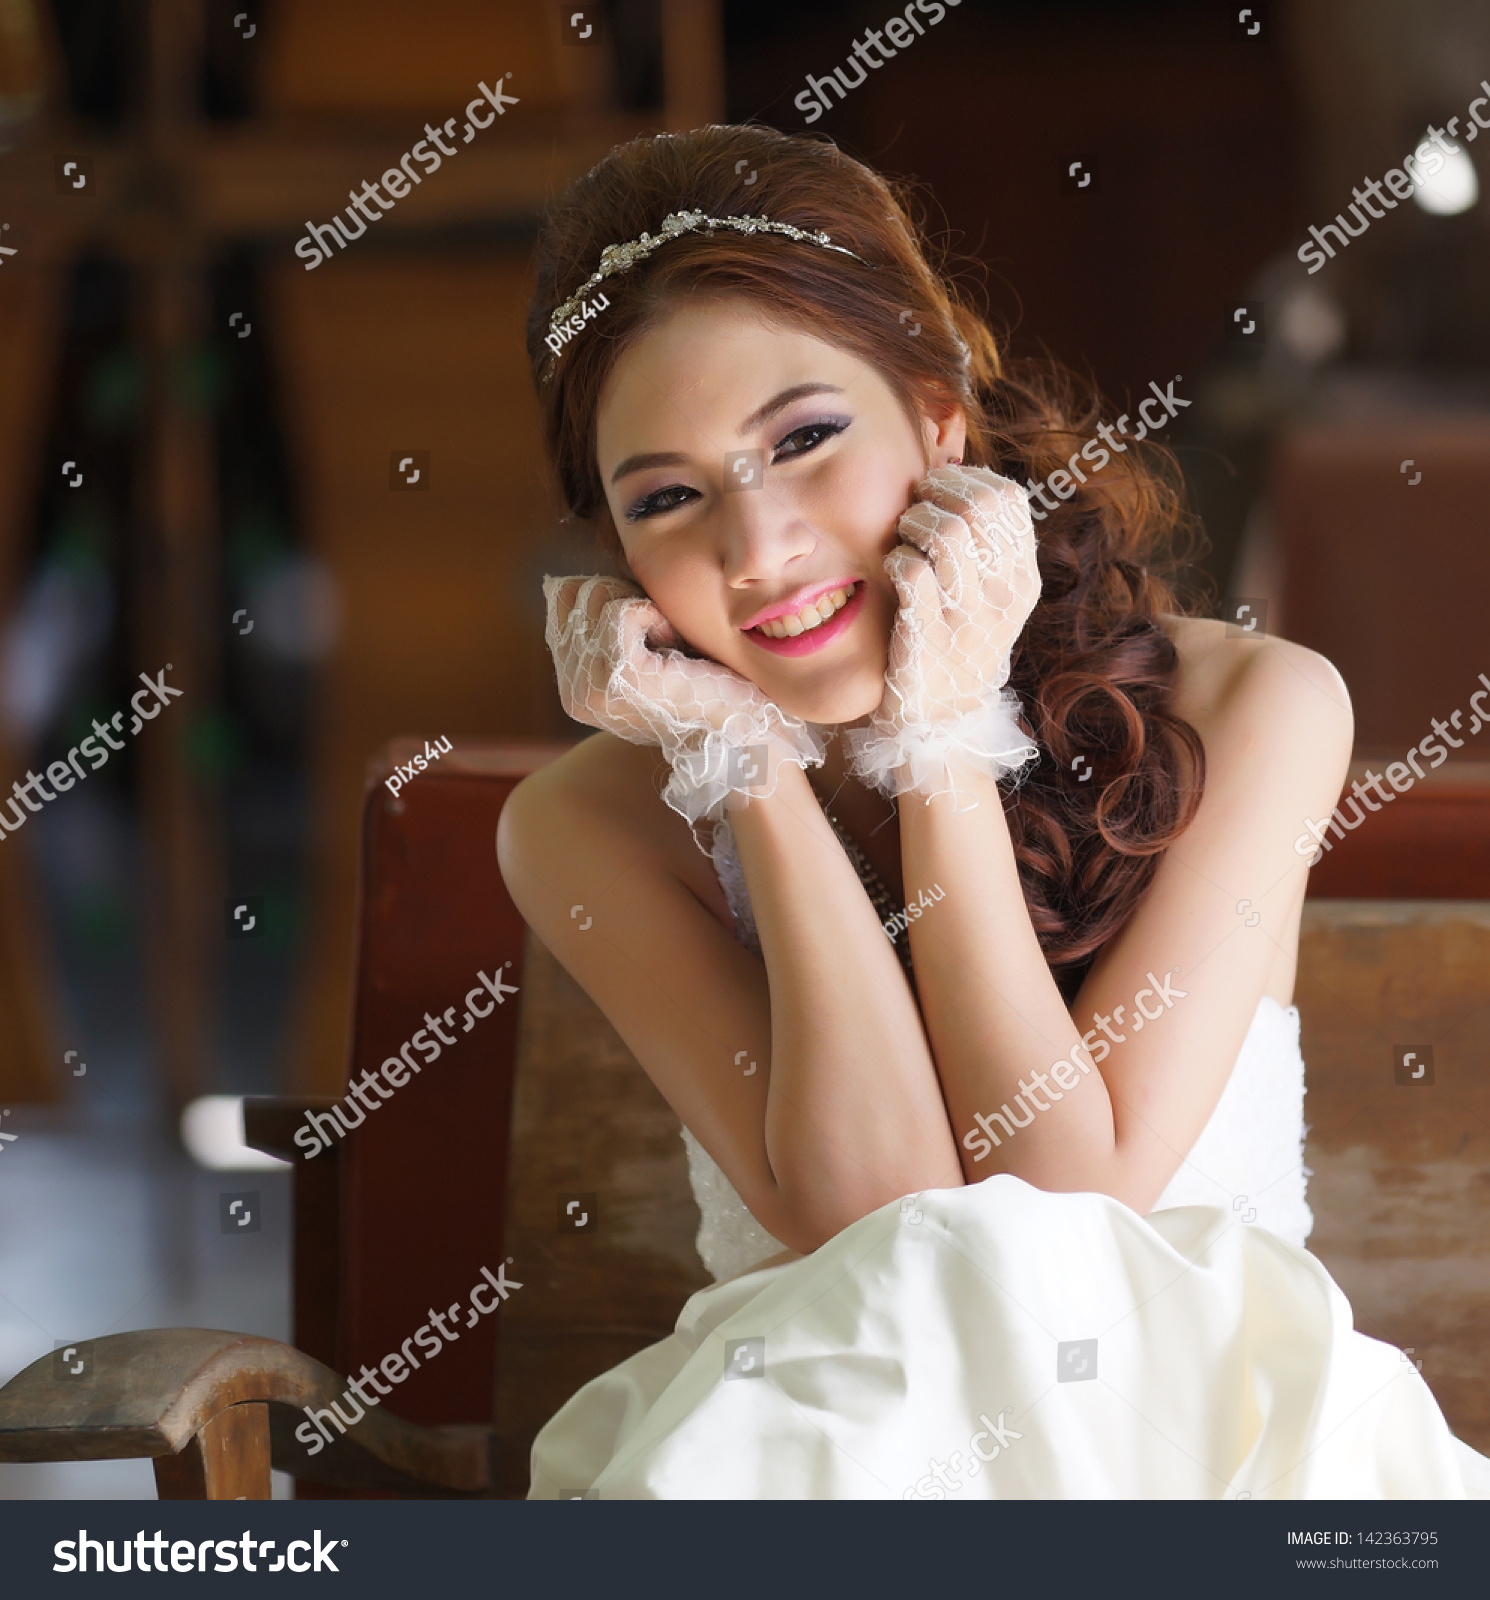 Young Asian Lady White Bride Dress Stock Photo 142363795 - Shutterstock